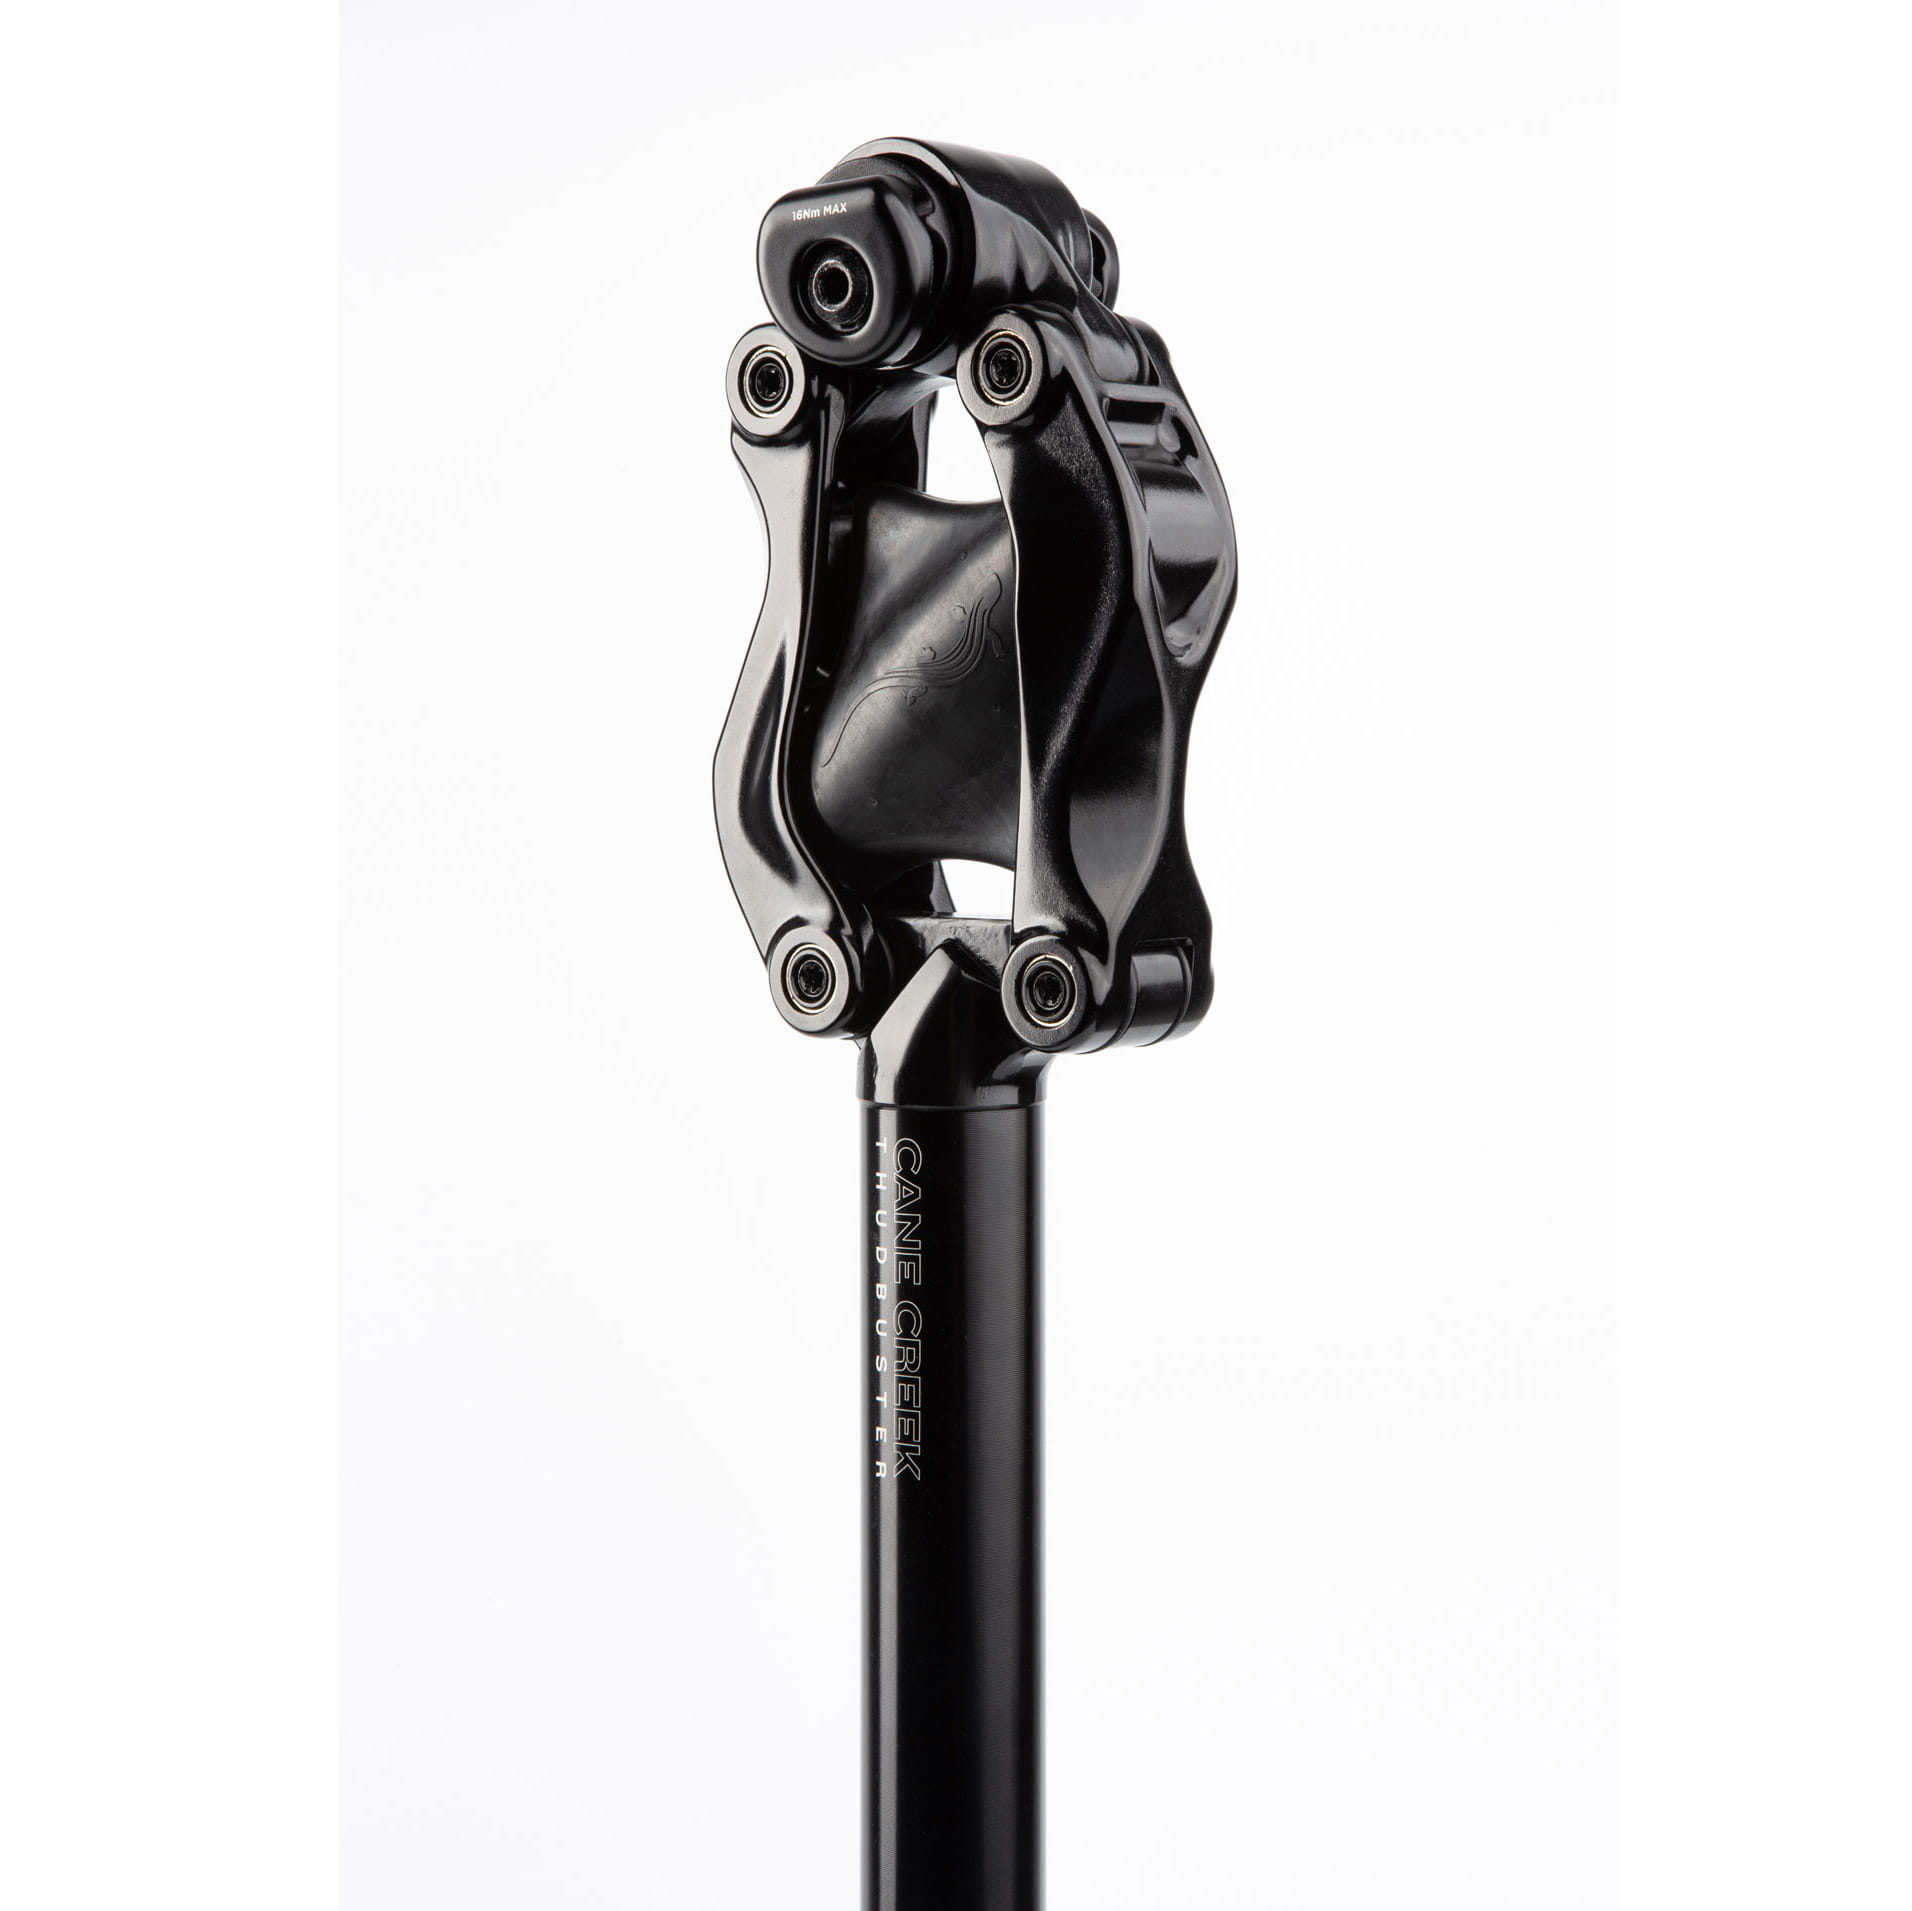 Cane Creek Thudbuster LT G4 Parallelogram Seat Post